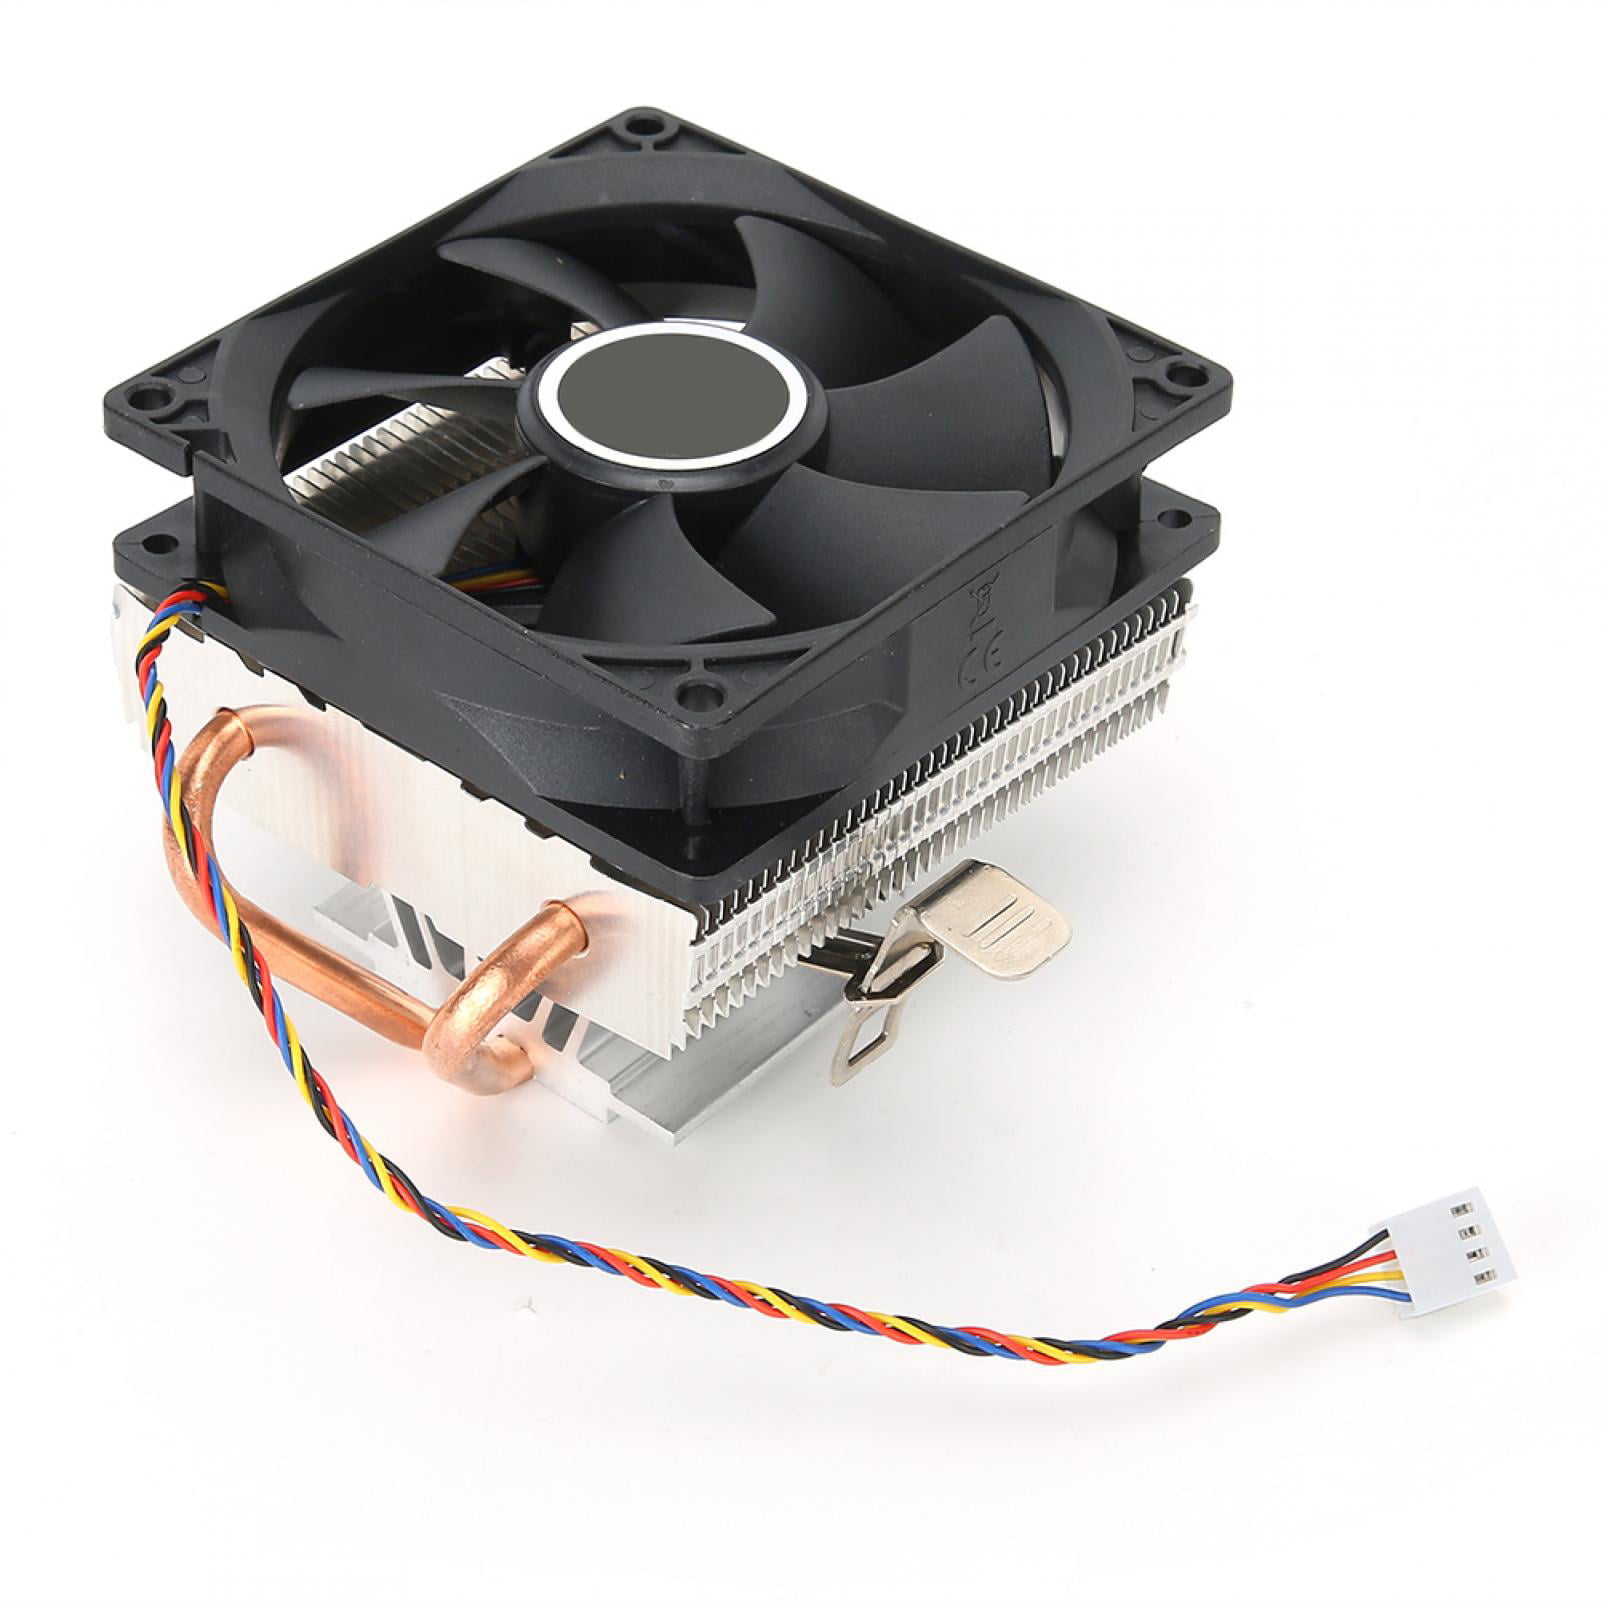 4-Pin Connector with Foldable Hinges for AMD 775/1150 / 1151/1155 / 1156/1366 CPU Cooler,Black Large Air Volume Quiet CPU Air Cooler Down Blow CPU Cooler 